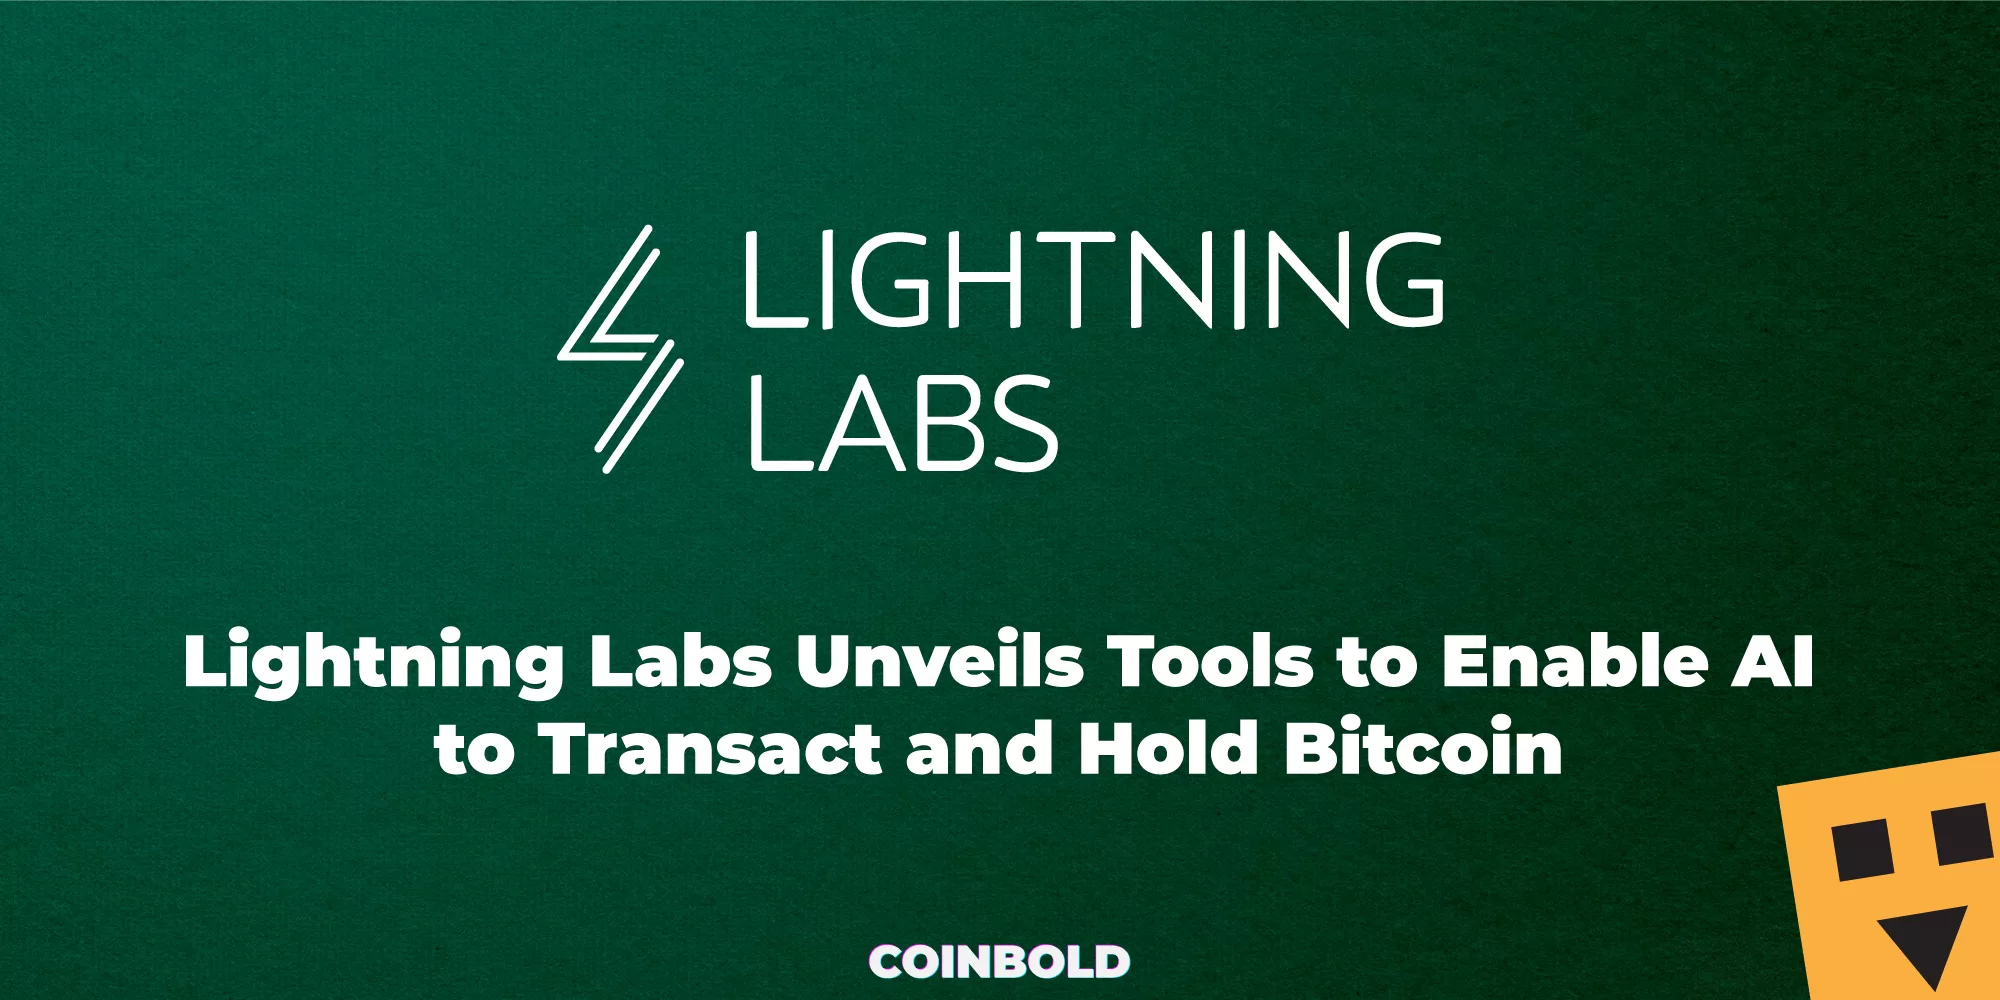 Lightning Labs Unveils Tools to Enable AI to Transact and Hold Bitcoin